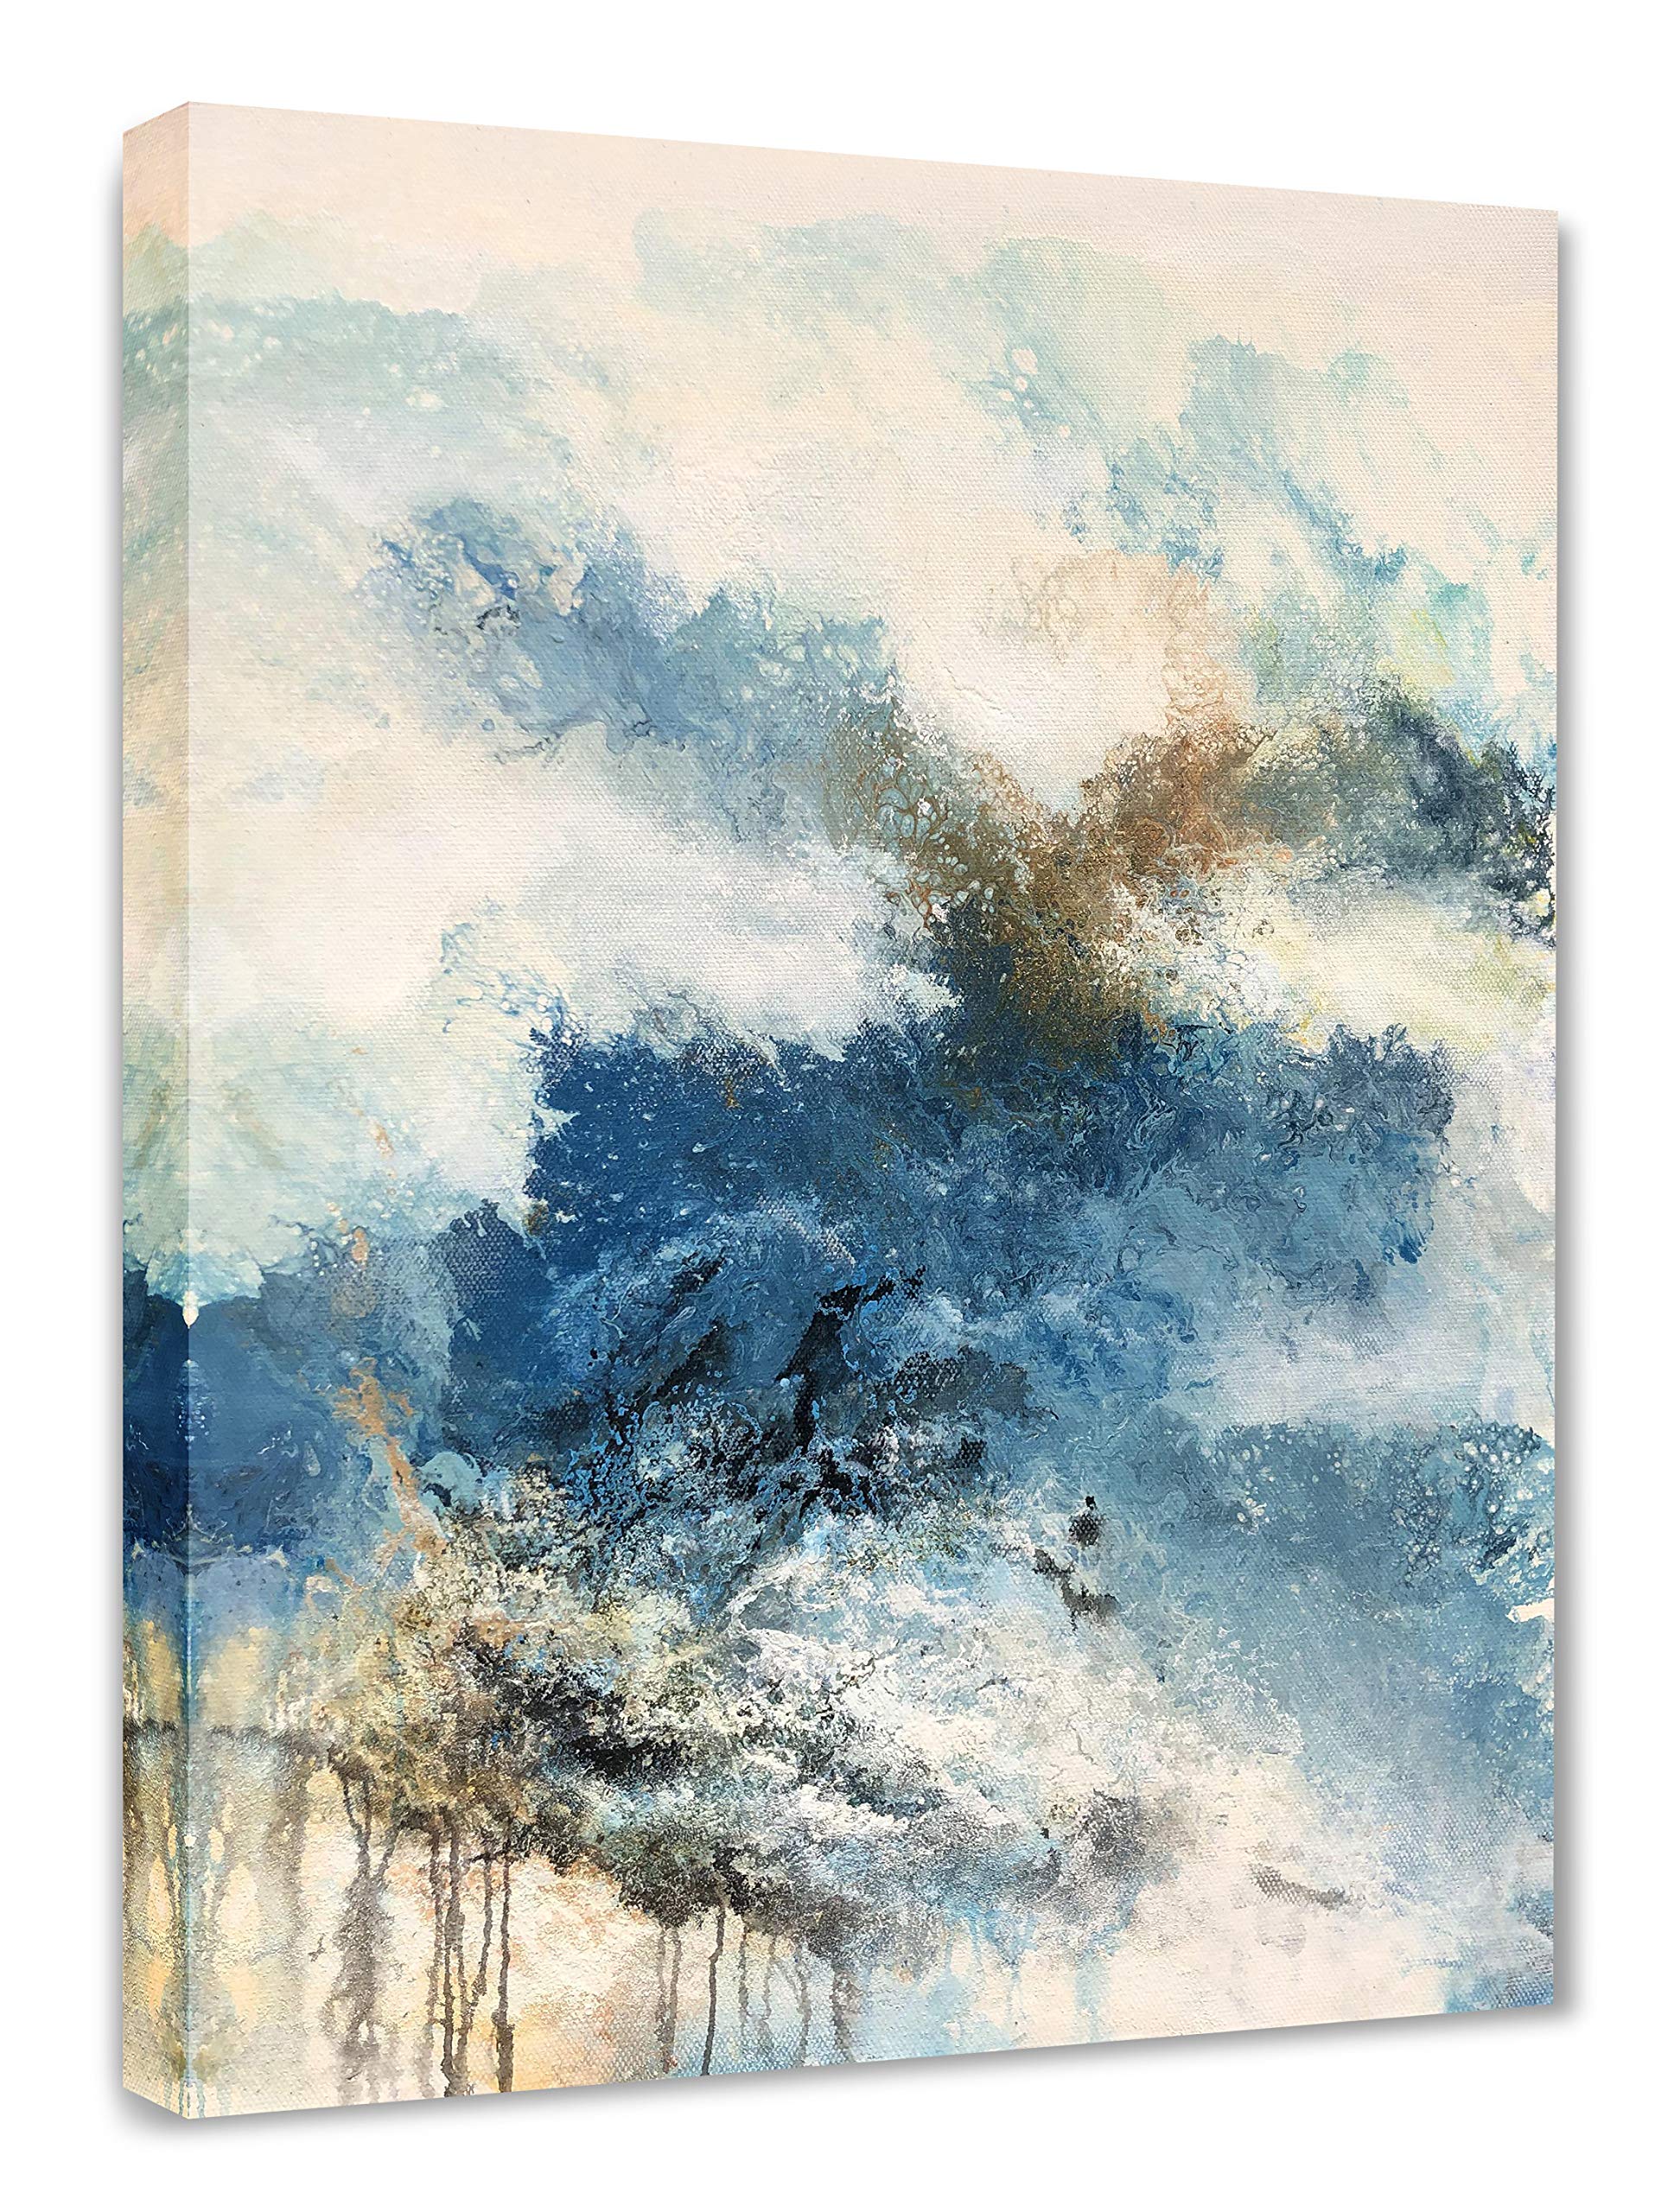 Yihui Arts Canvas Wall Art Abstract Watercolor Painting Picture One Panel Large Size Modern Blue Artwork for Living Room Bedroom Bathroom Decor